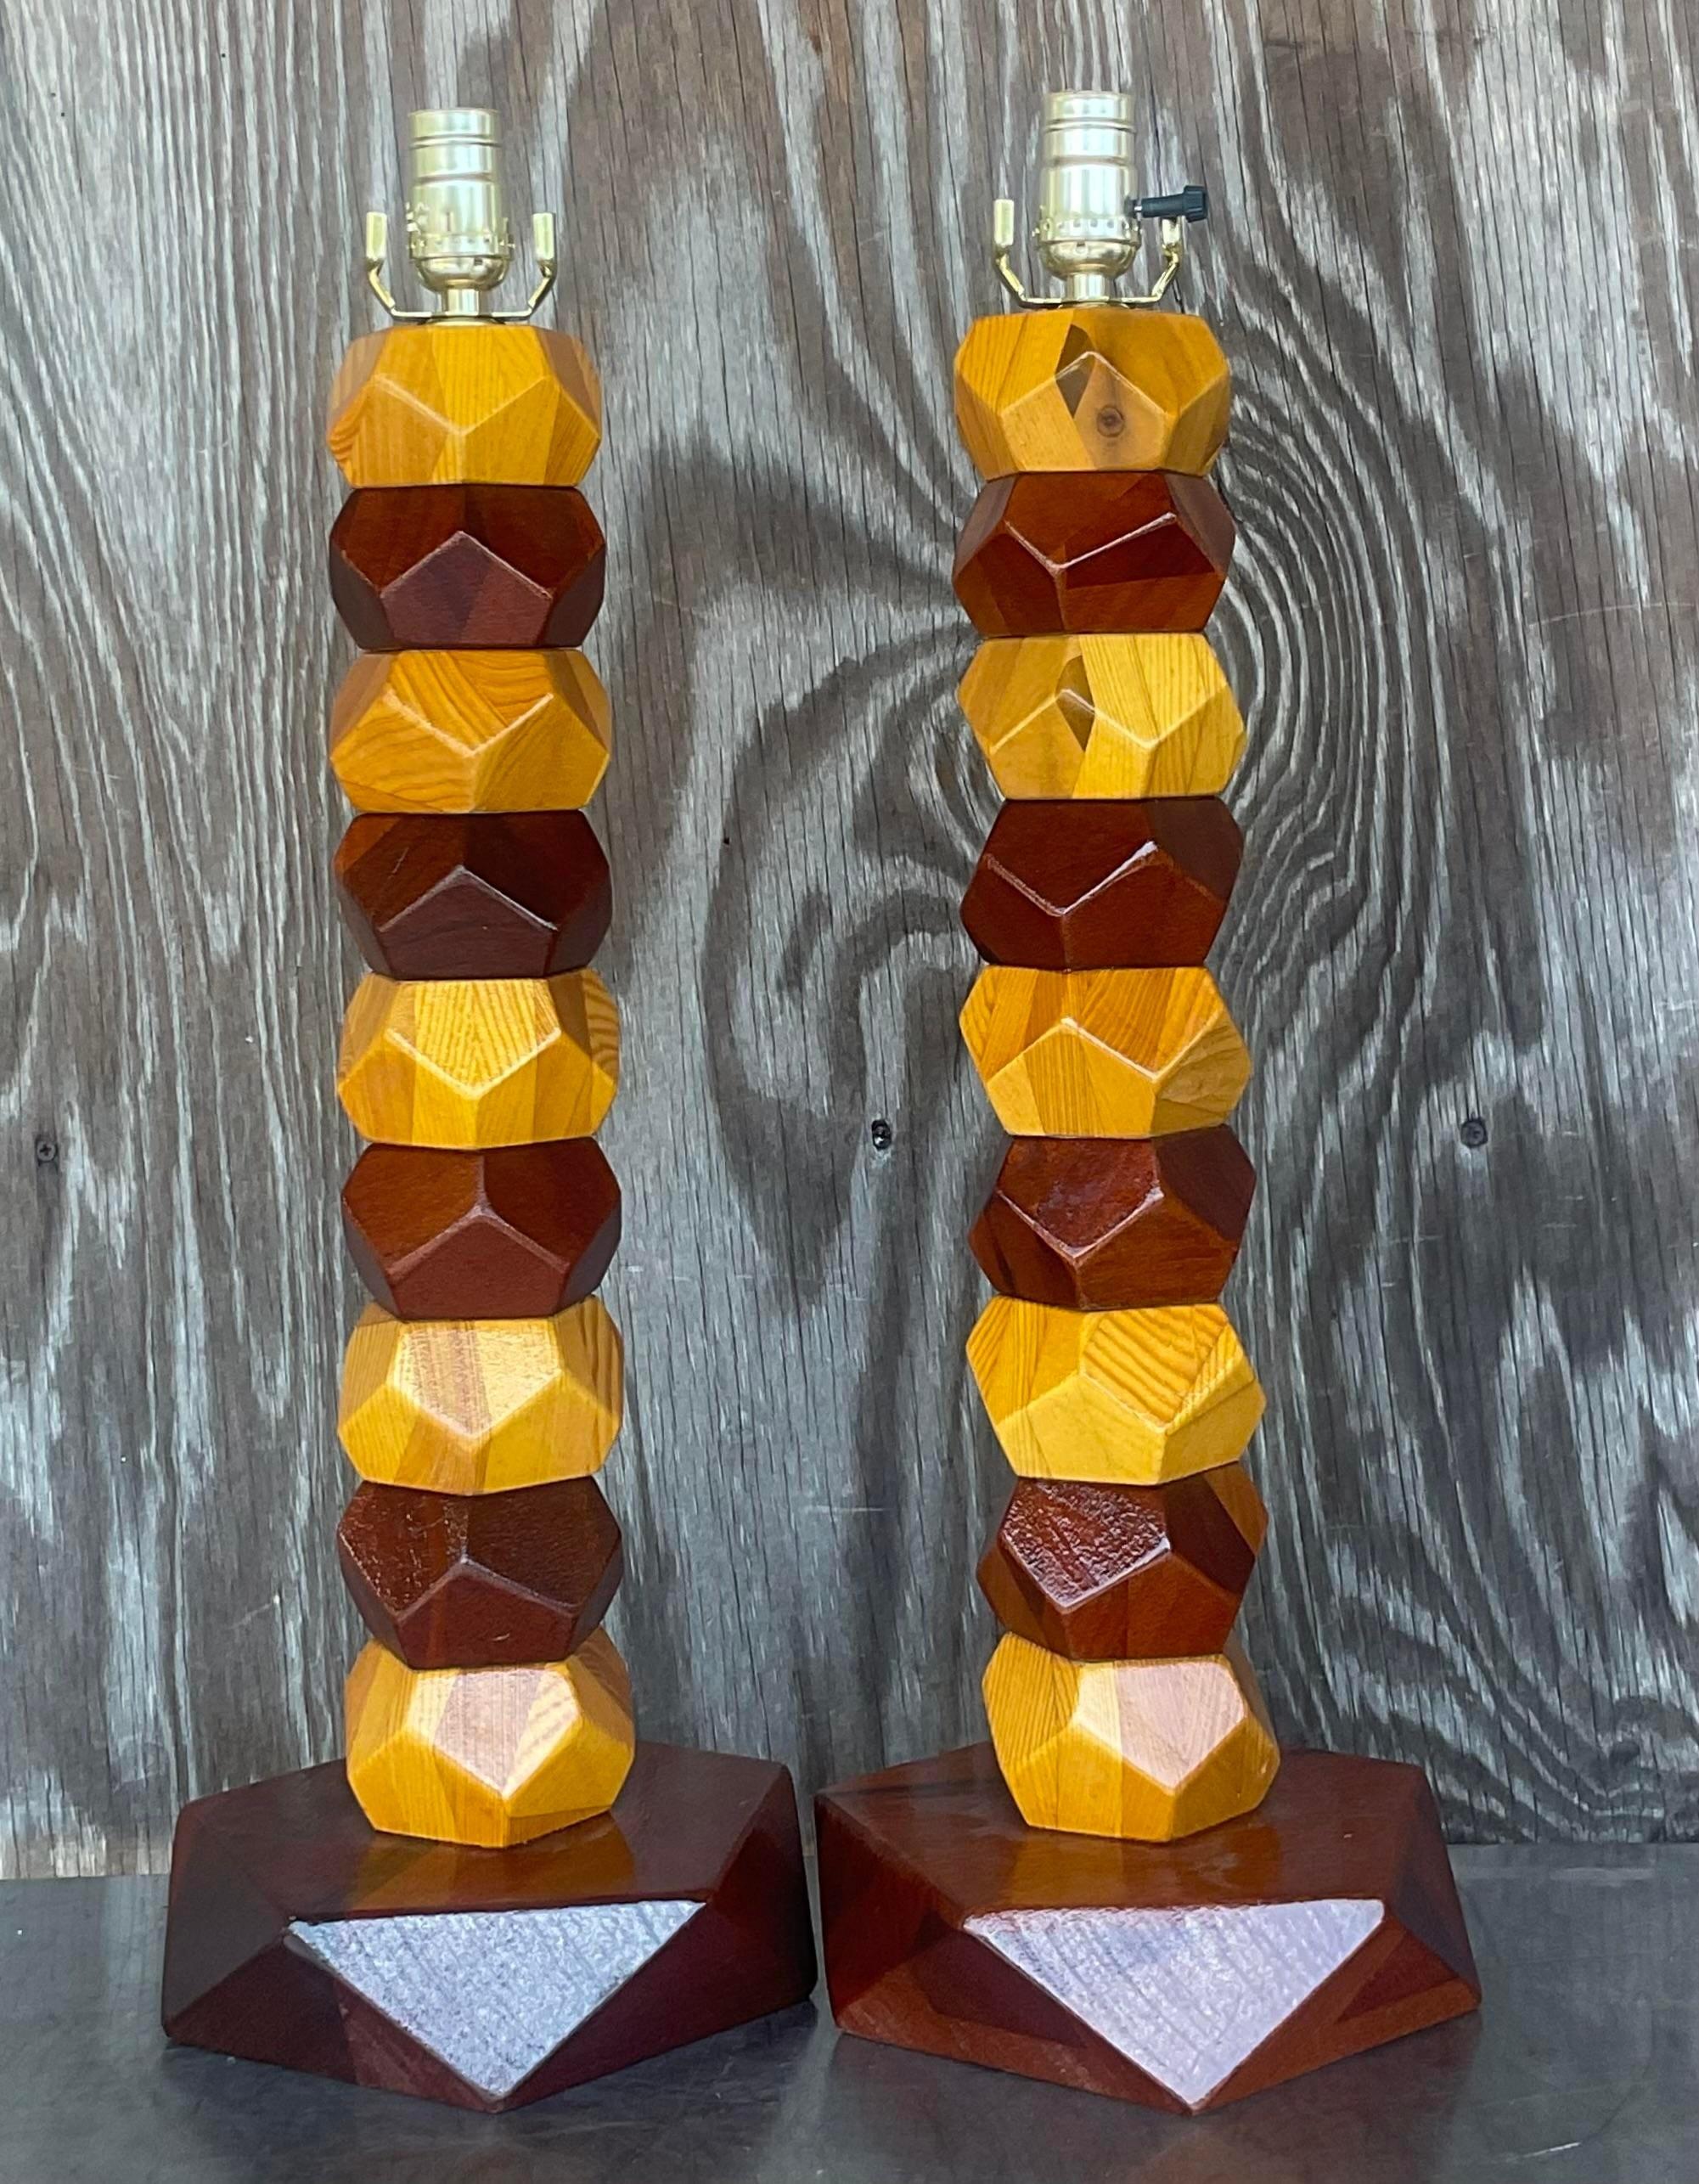 20th Century Vintage Boho Stacked Faceted Wood Block Lamps - a Pair For Sale